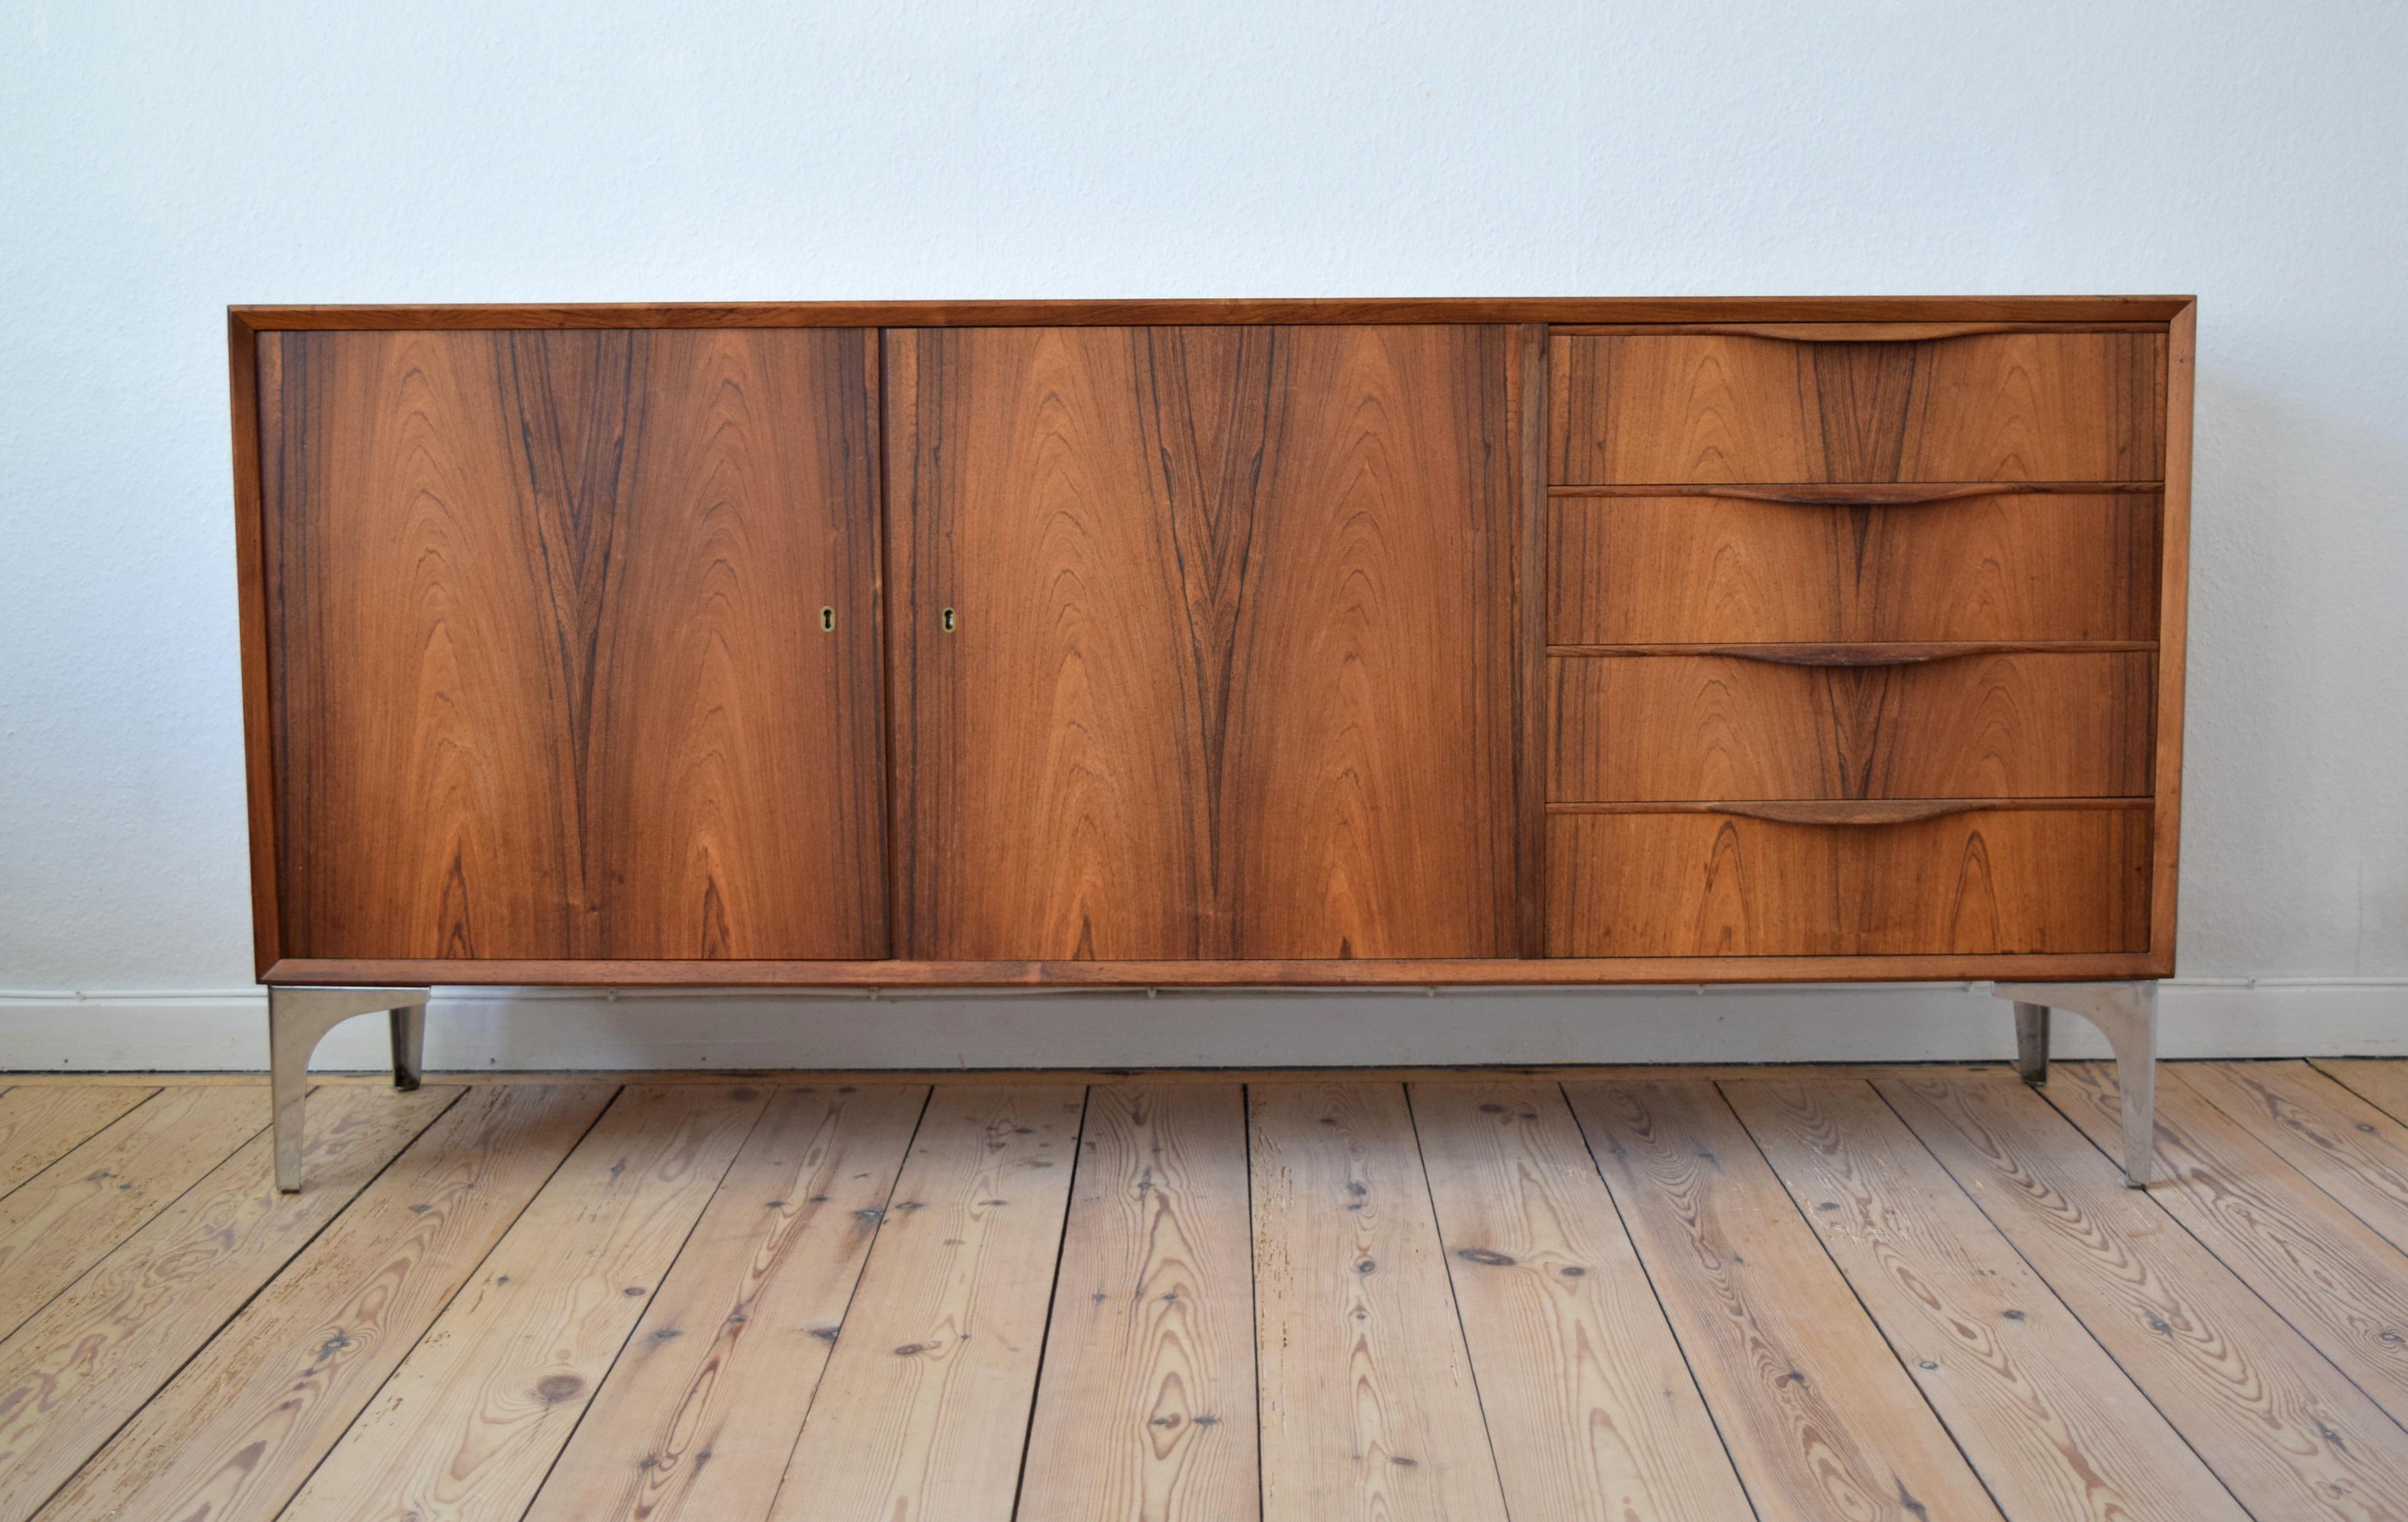 Low rosewood sideboard designed by Erling Torvits for Klim Møbelfabrik. This piece features four drawers with lipped handles, and two lockable doors (key included) with interior shelves. Contrasting teak and rosewood veneers used on the inside of